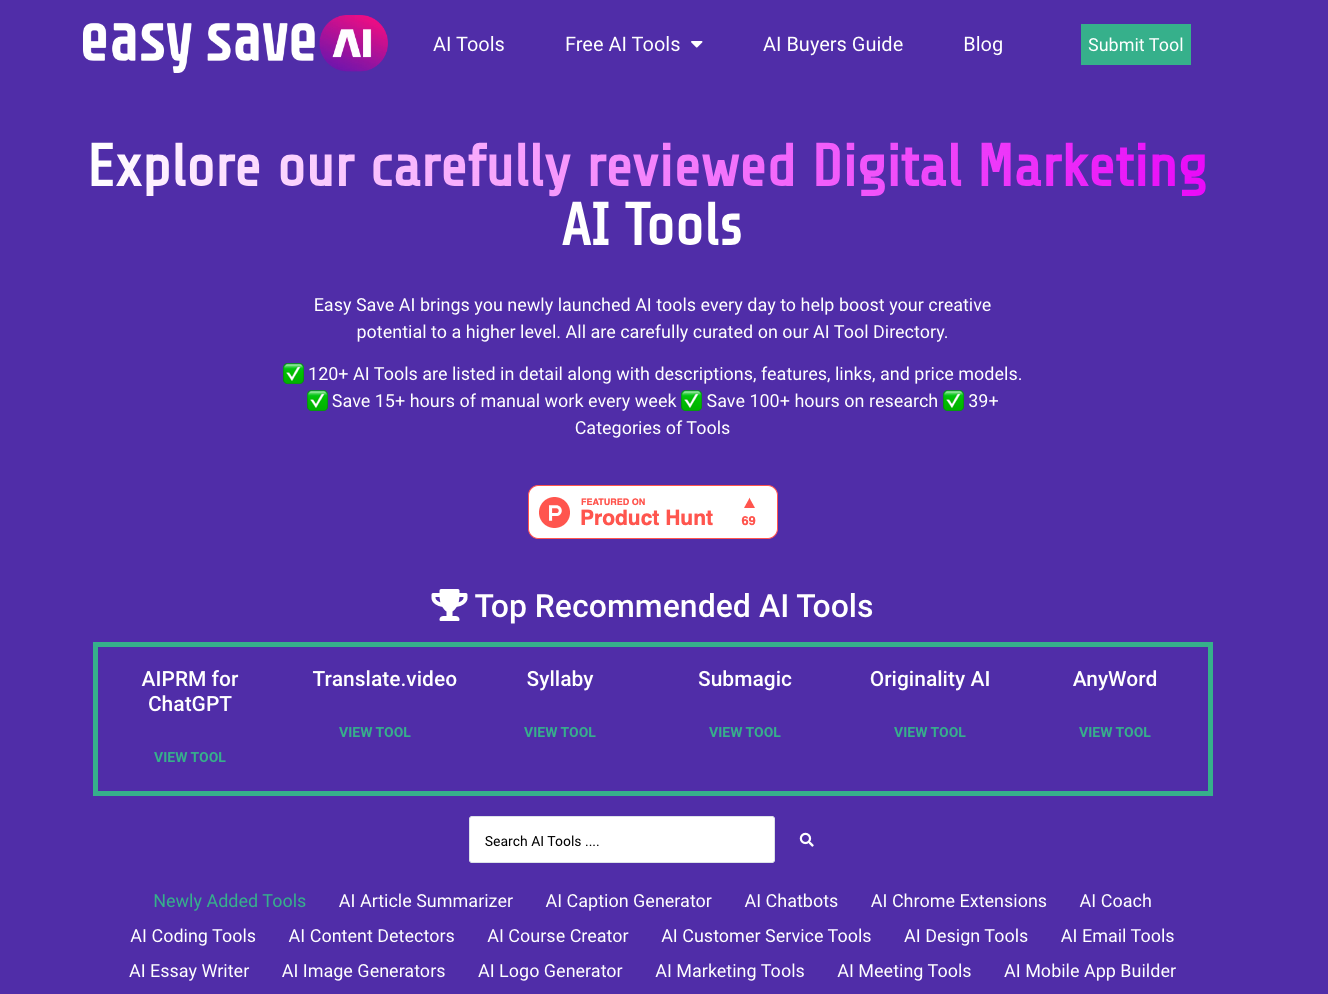 Easy Save AI's user interface for search through a list of AI Tools